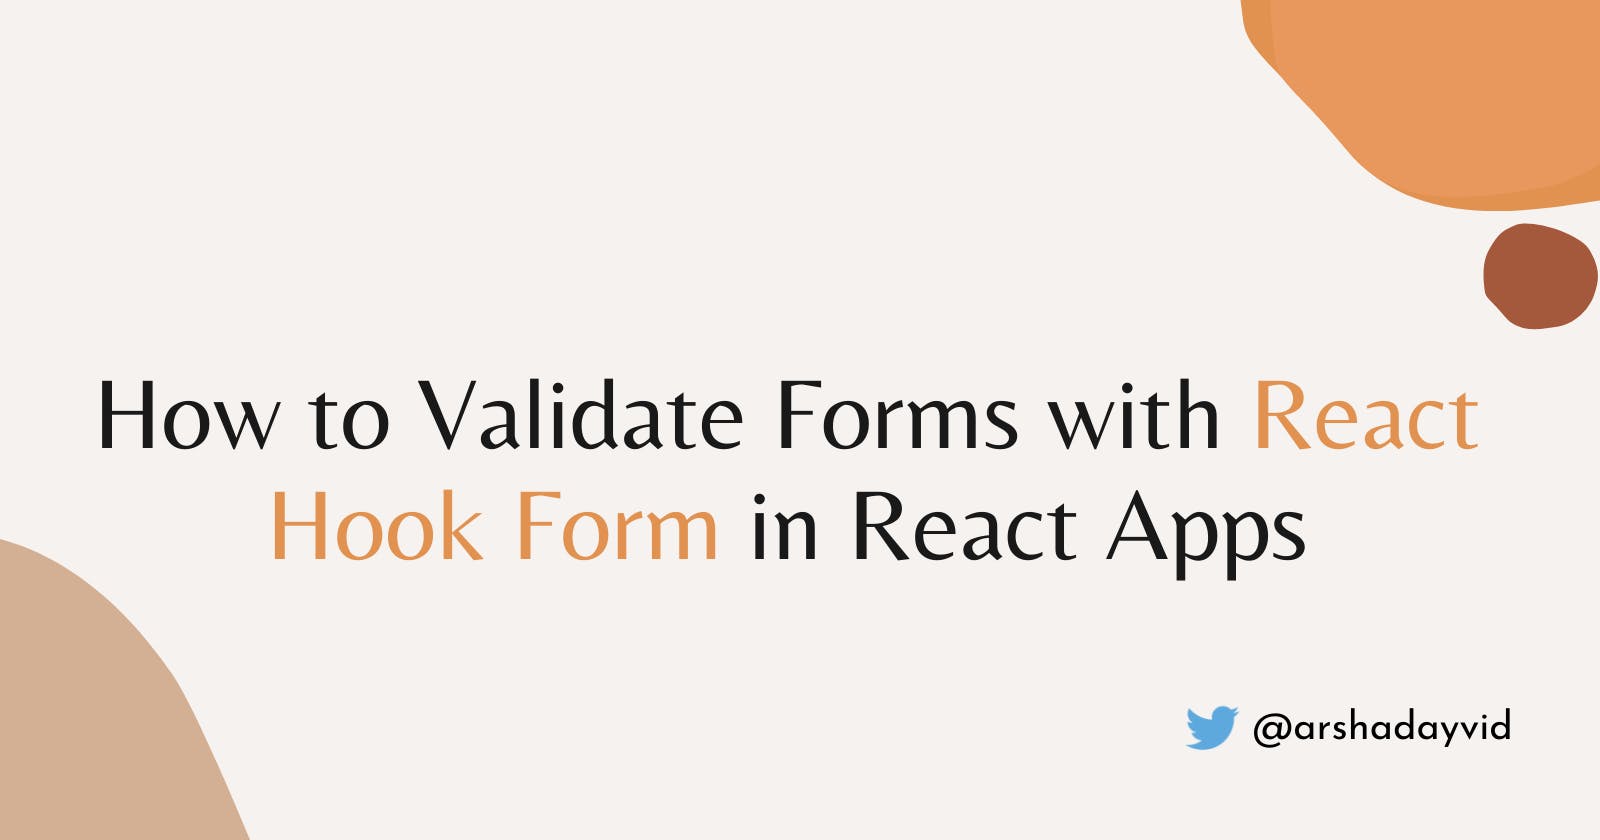 How to Validate Forms with React Hook Form in React Apps